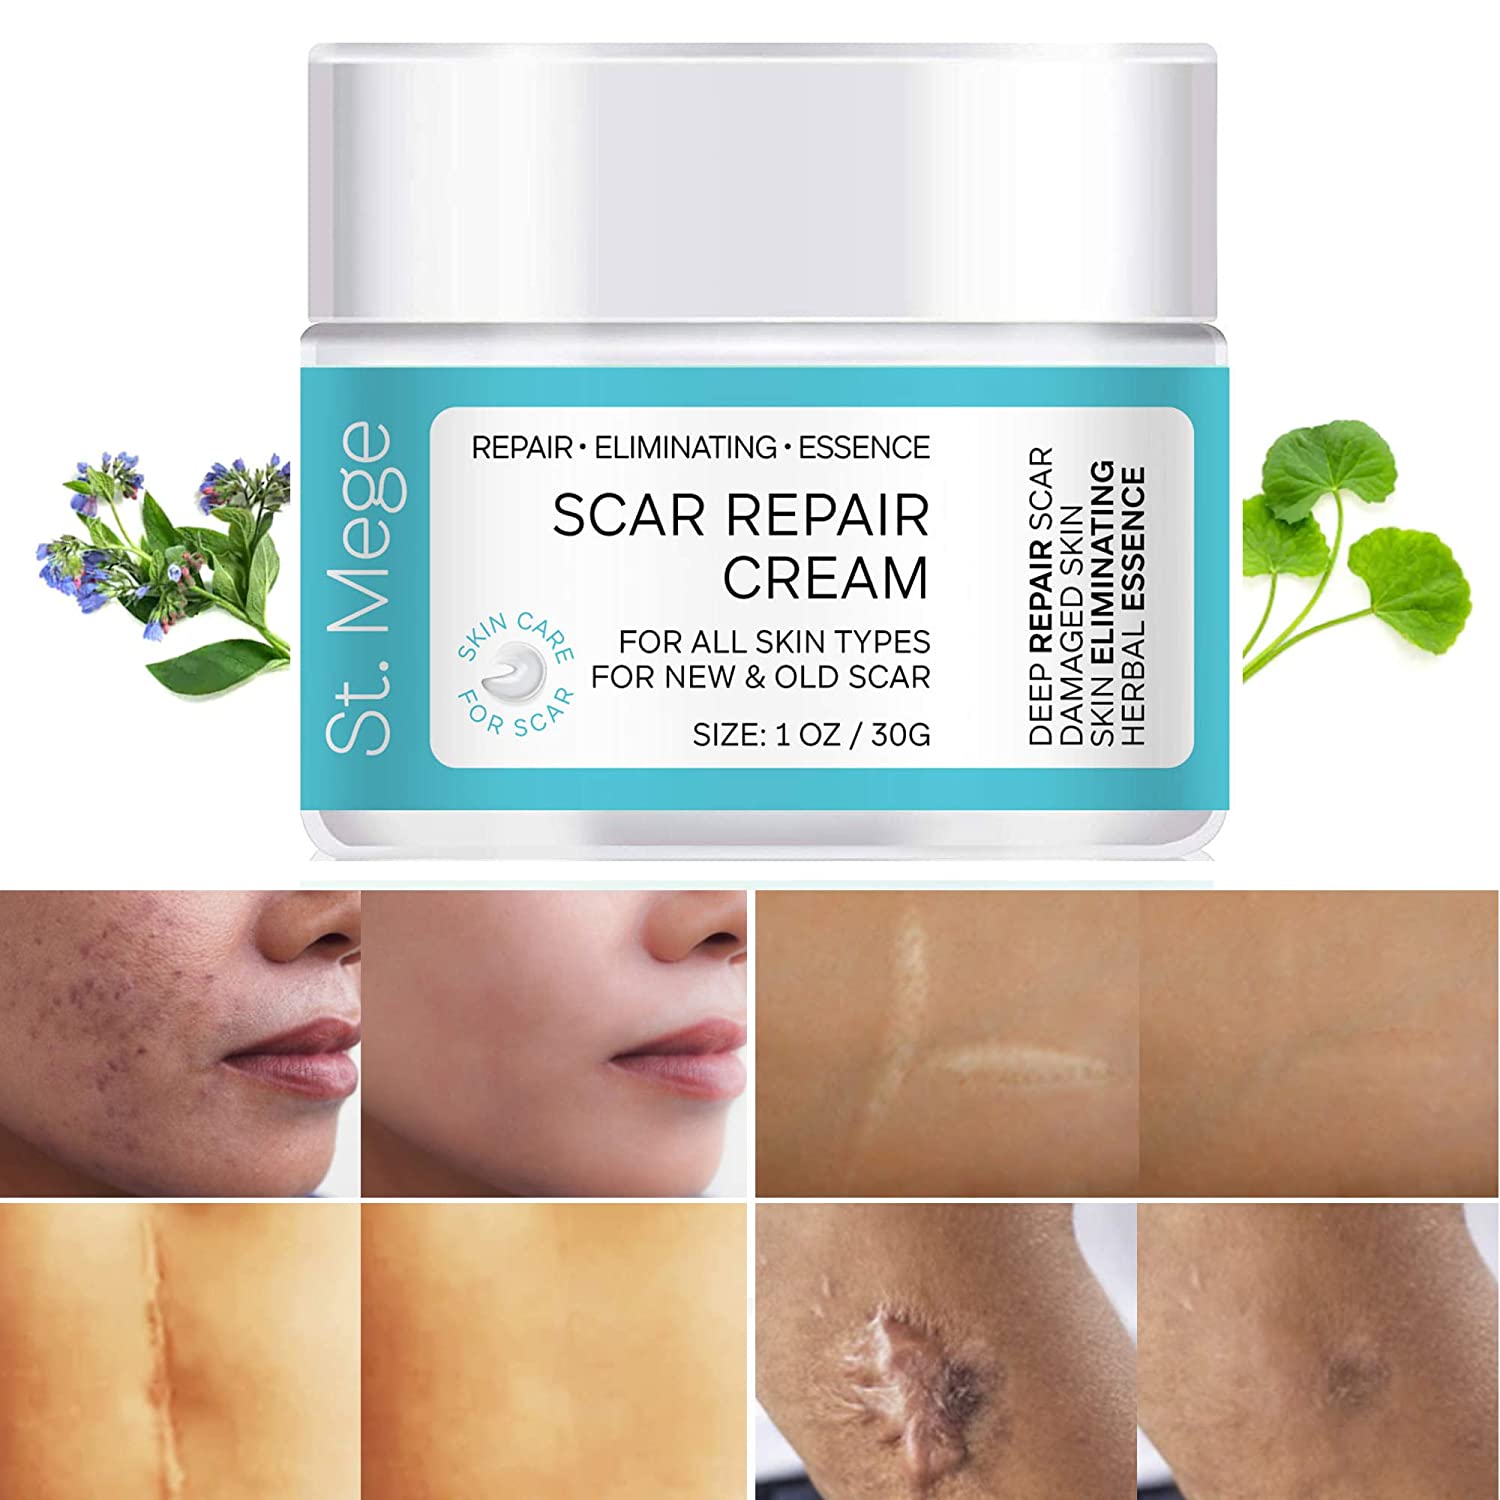 10 Best Scar Removal Creams in Pakistan For Stretch Marks, Surgery and Acne